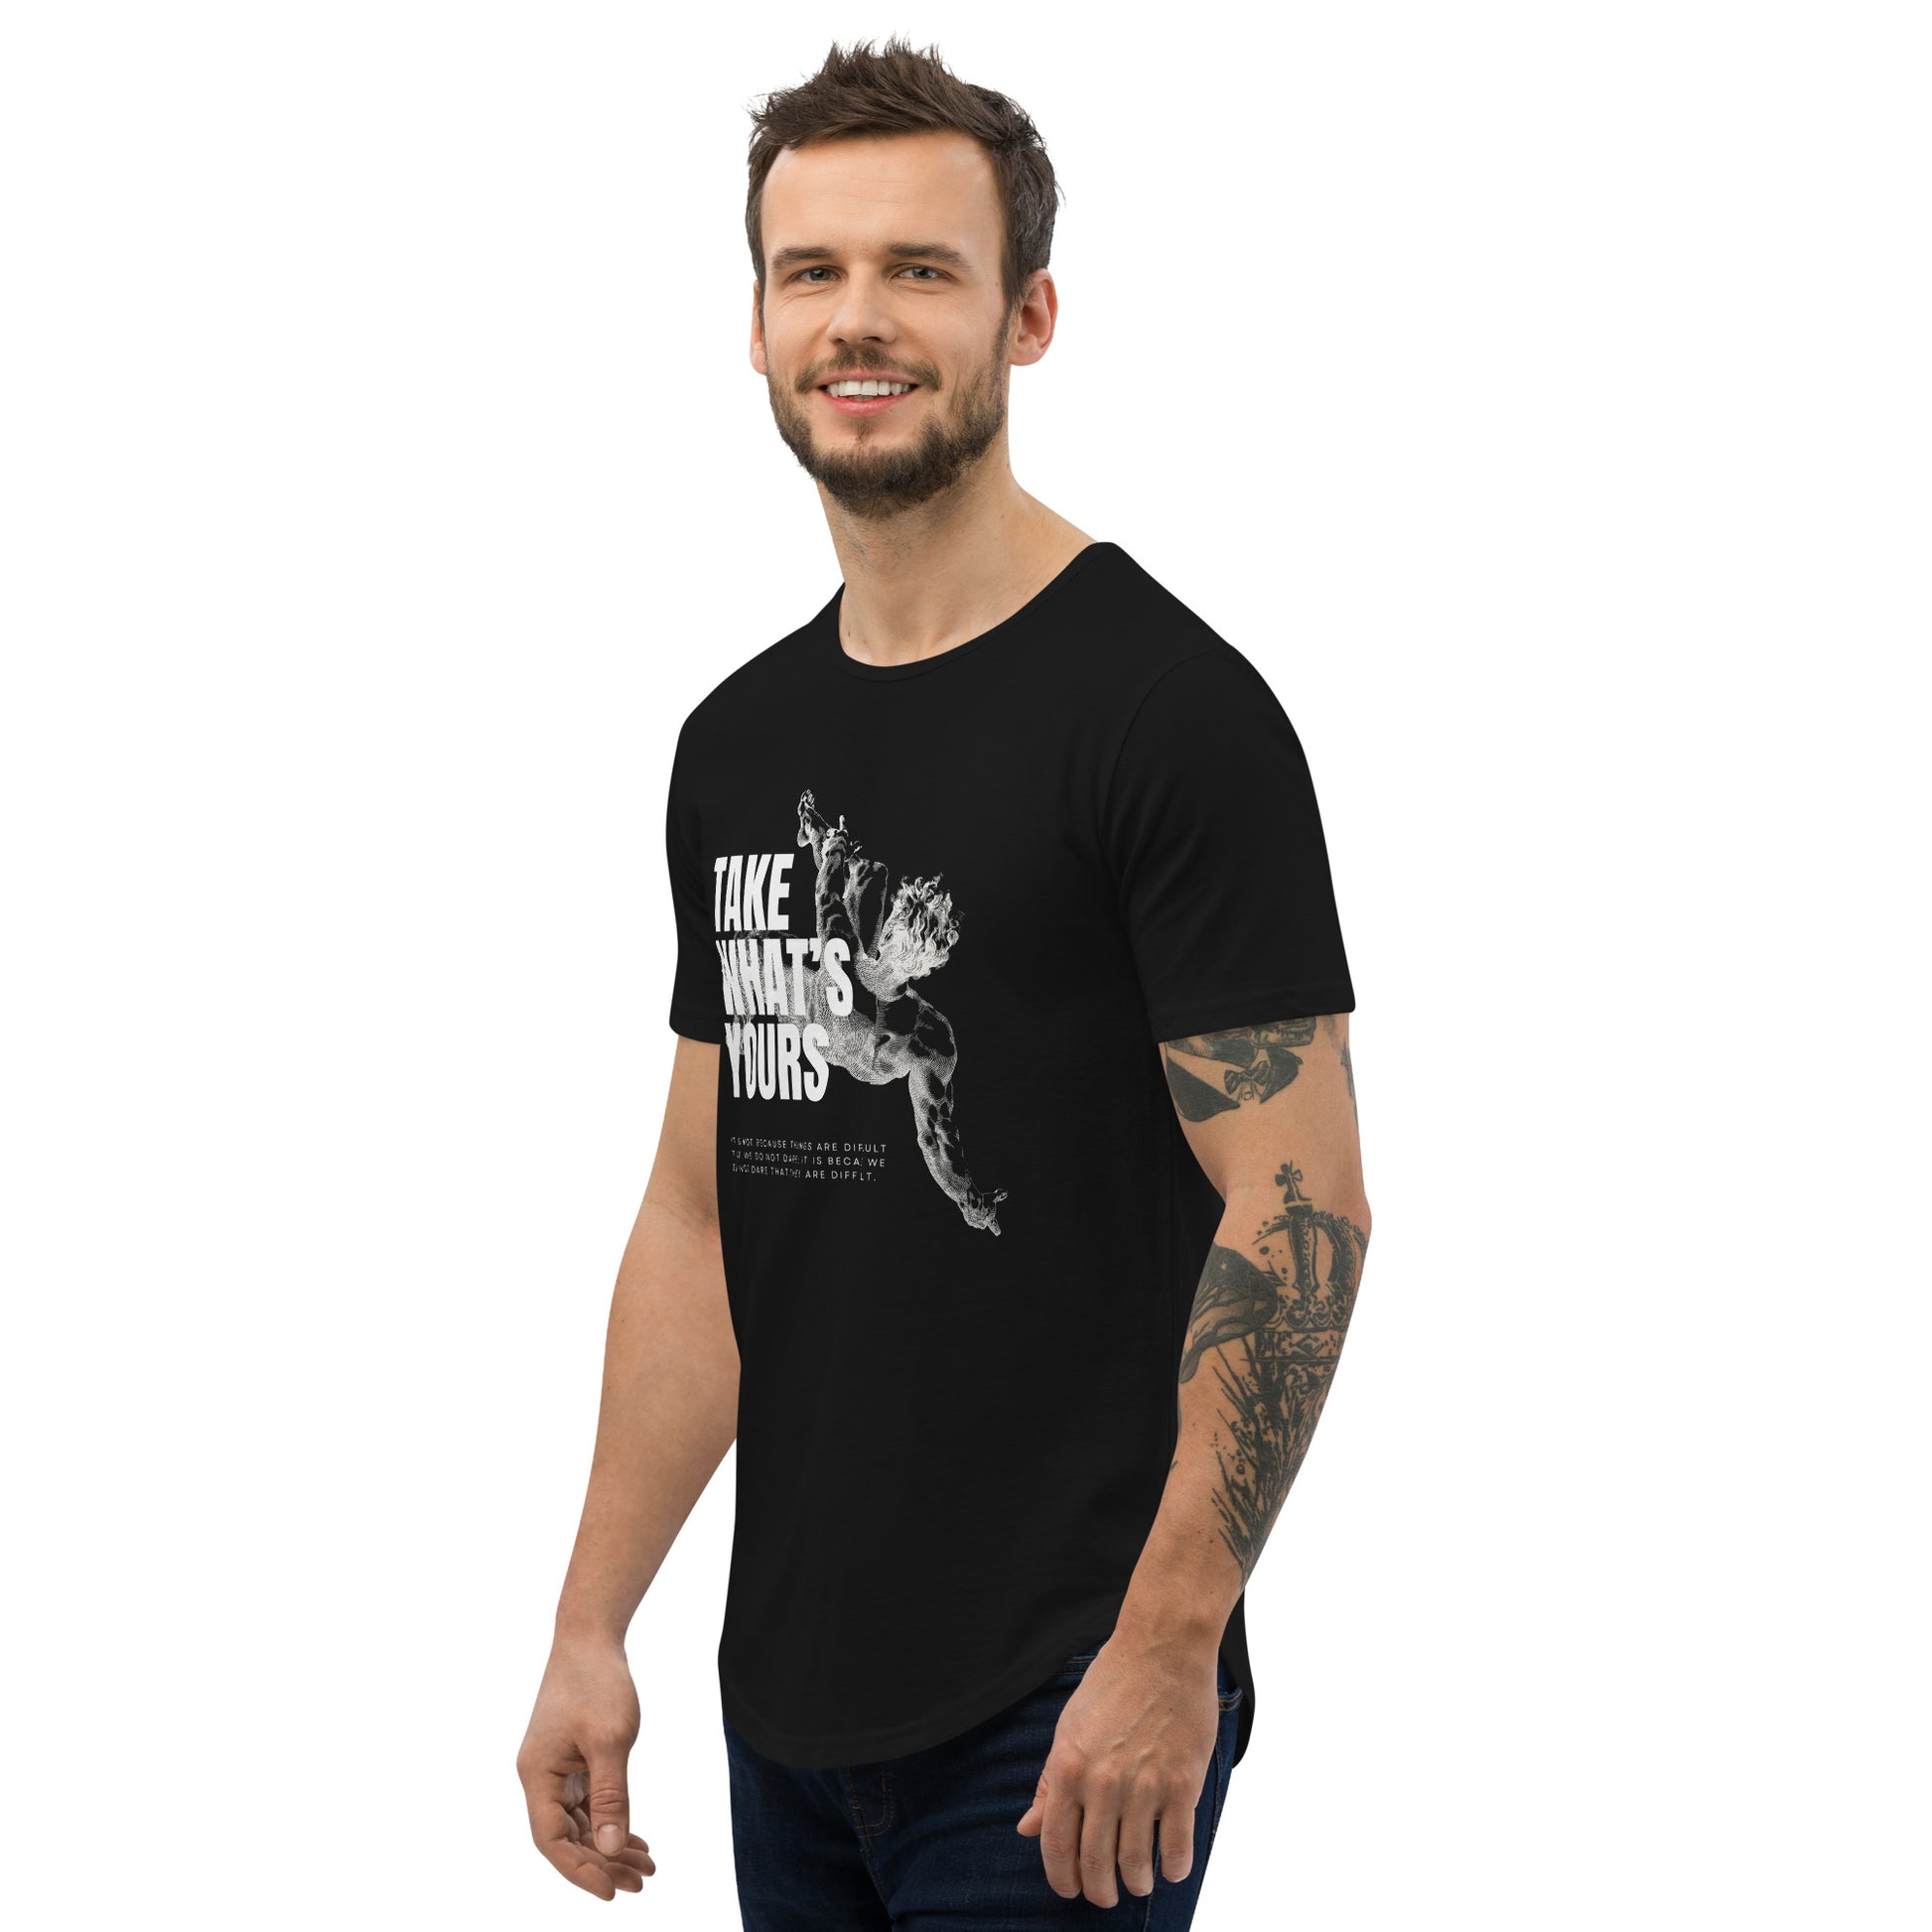 Take What's Yours Men's Curved Hem T-Shirt in Black